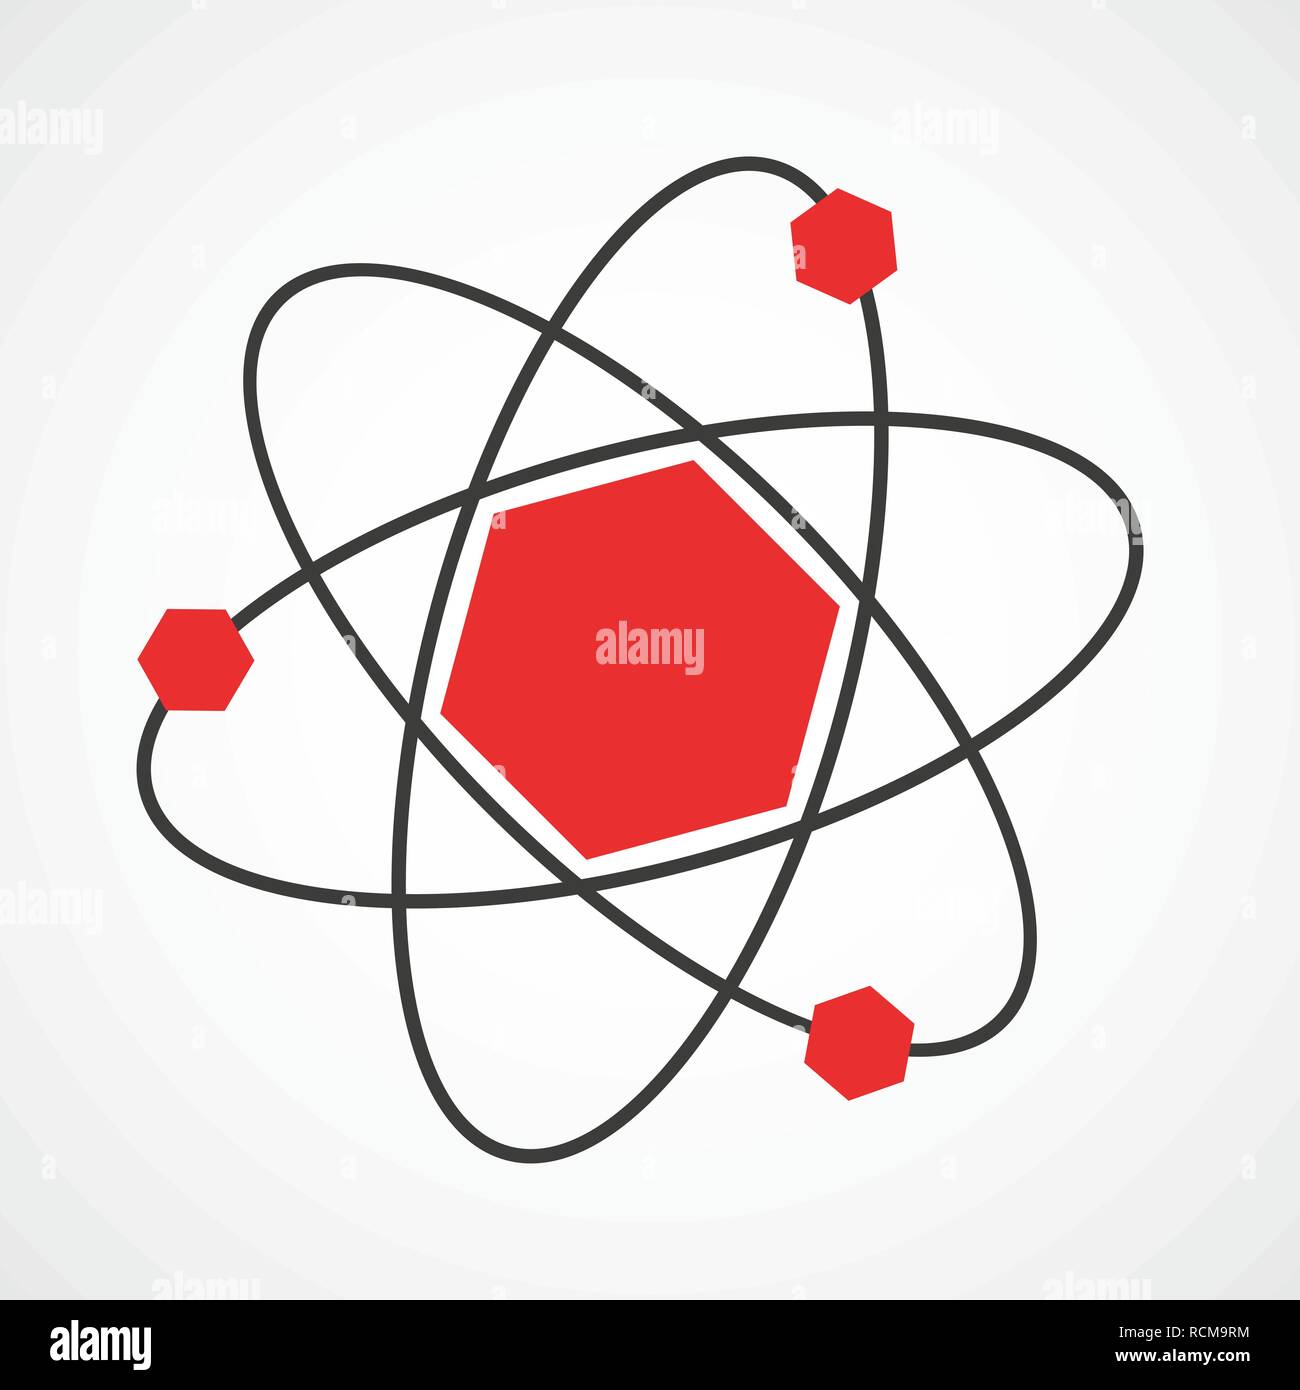 Atom icon in flat design. Vector illustration. Simple symbol of the molecule or atom, isolated. Stock Vector